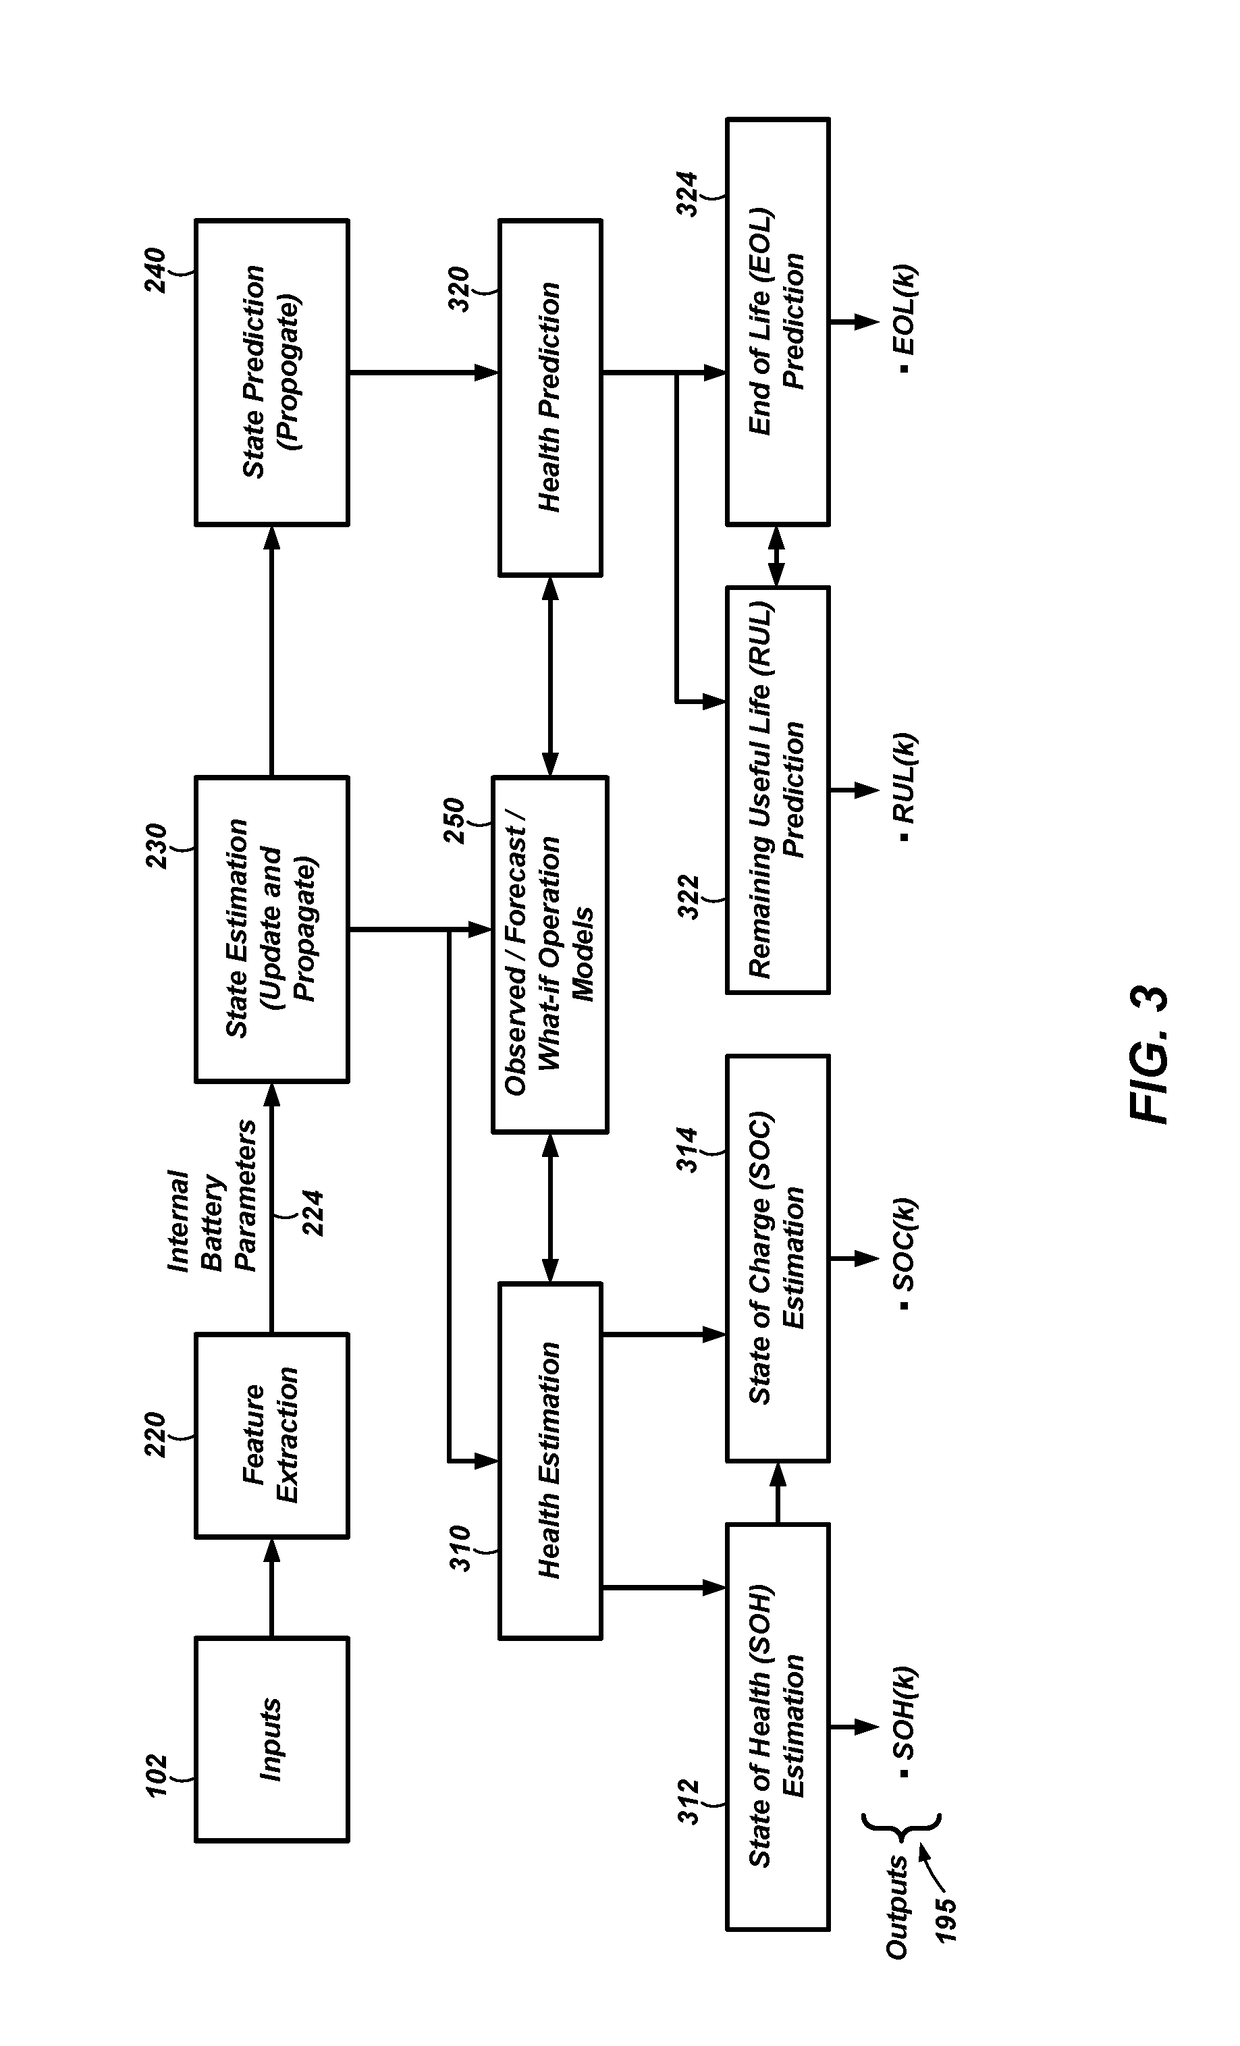 Systems and methods for estimation and prediction of battery health and performance